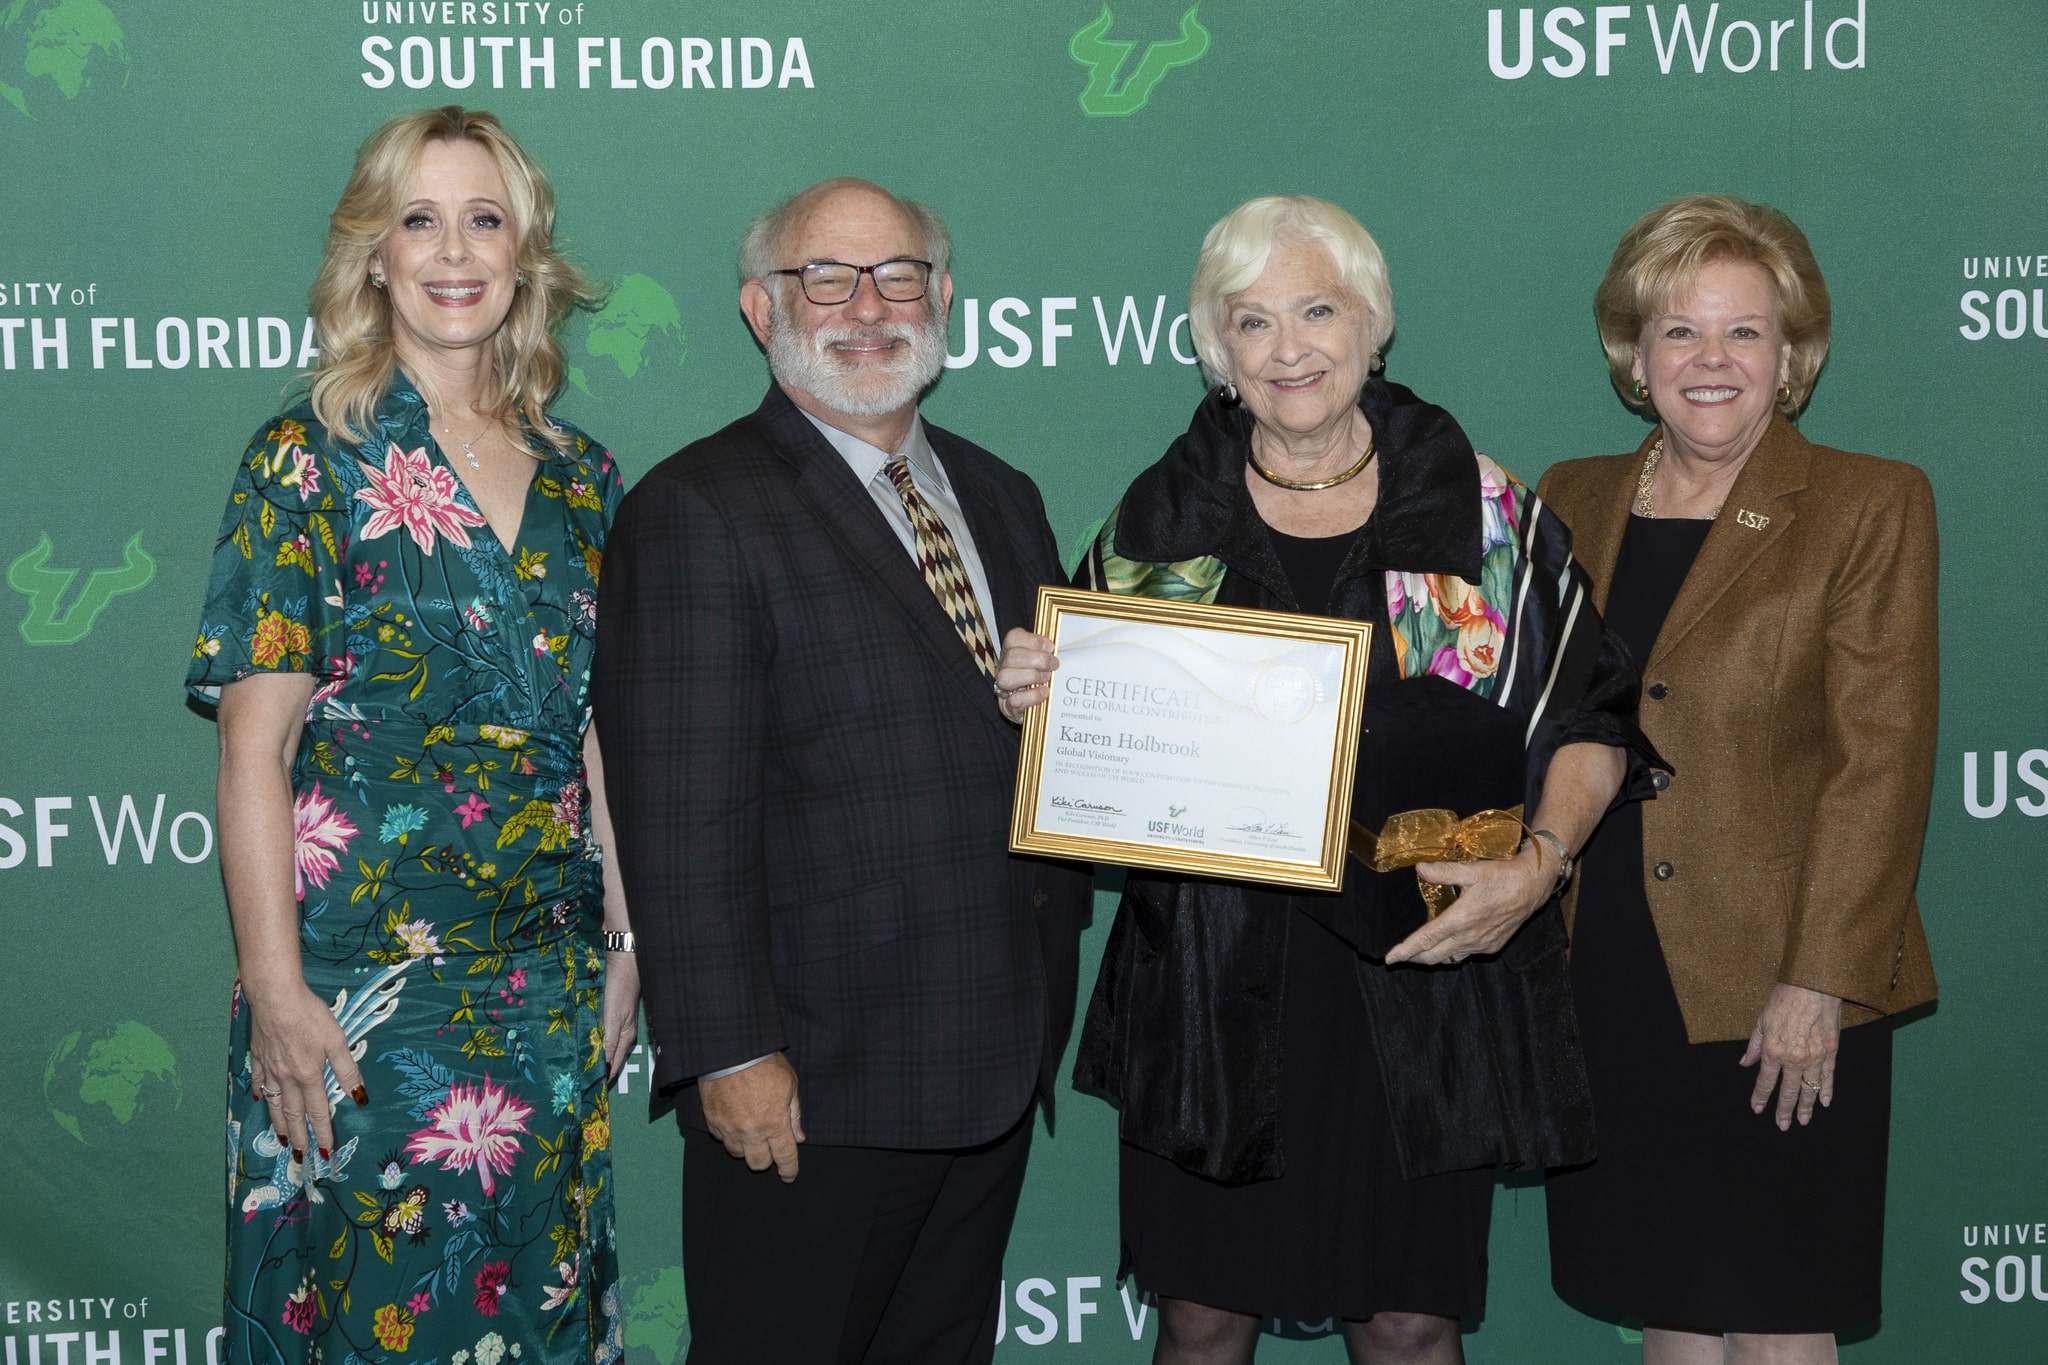 Holbrook receiving award from USF World